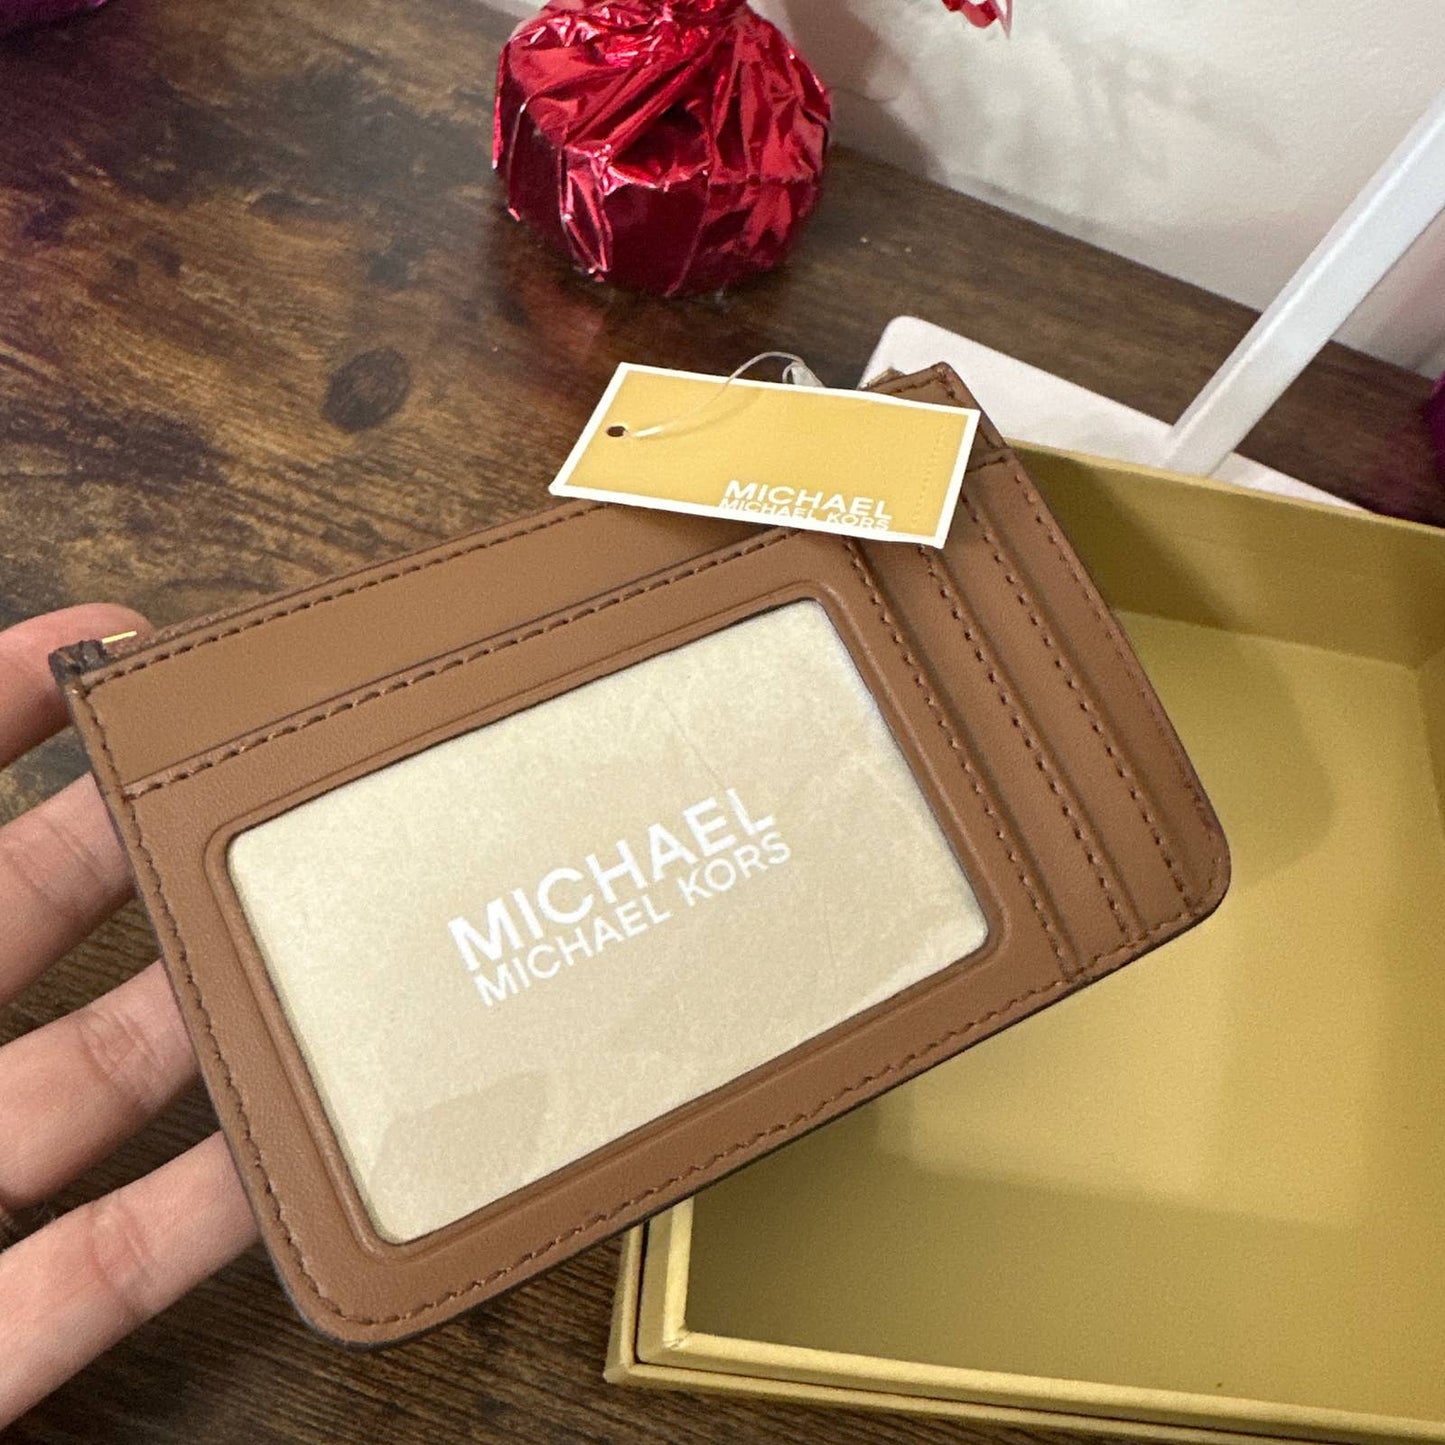 NWT MICHAEL KORS Signature Card Holder / Coin Purse and Airpods Case Gift Set